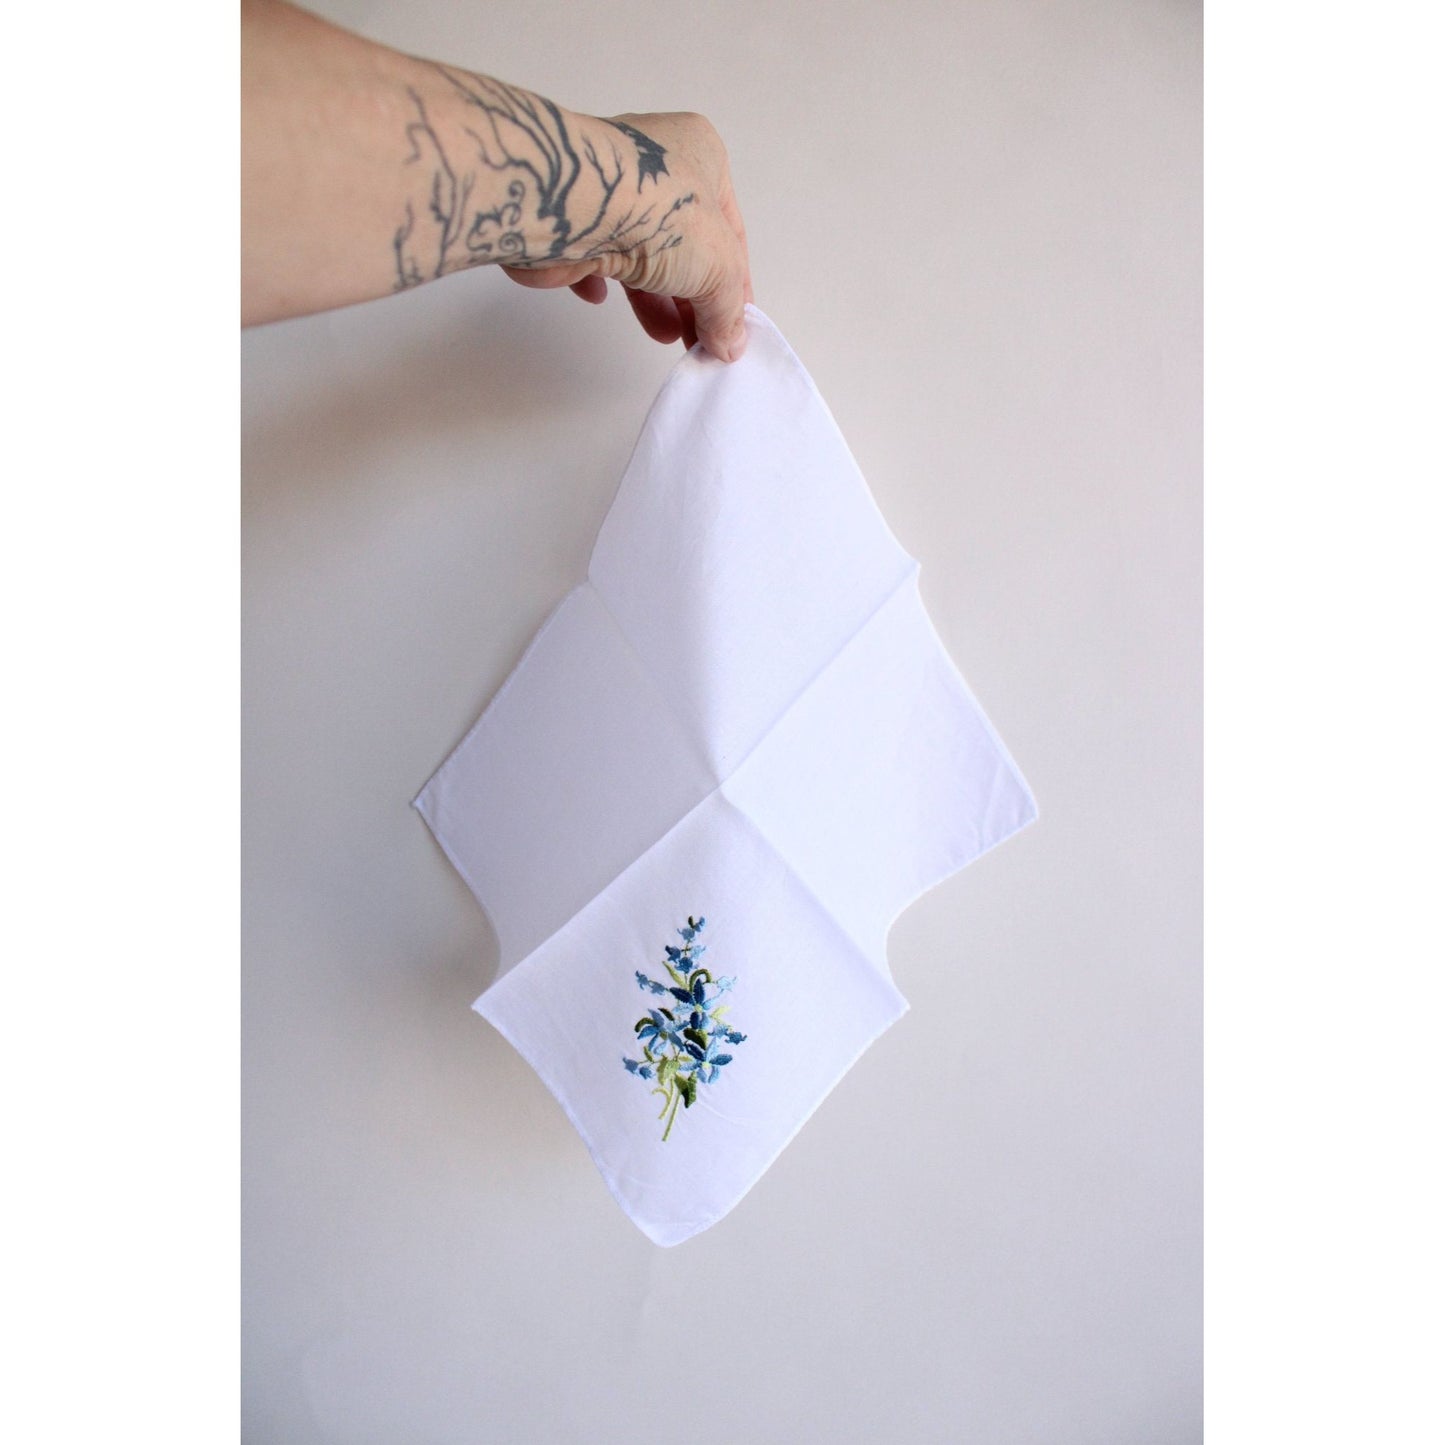 Vintage White Linen With Blue Embroidered Flowers Hankie